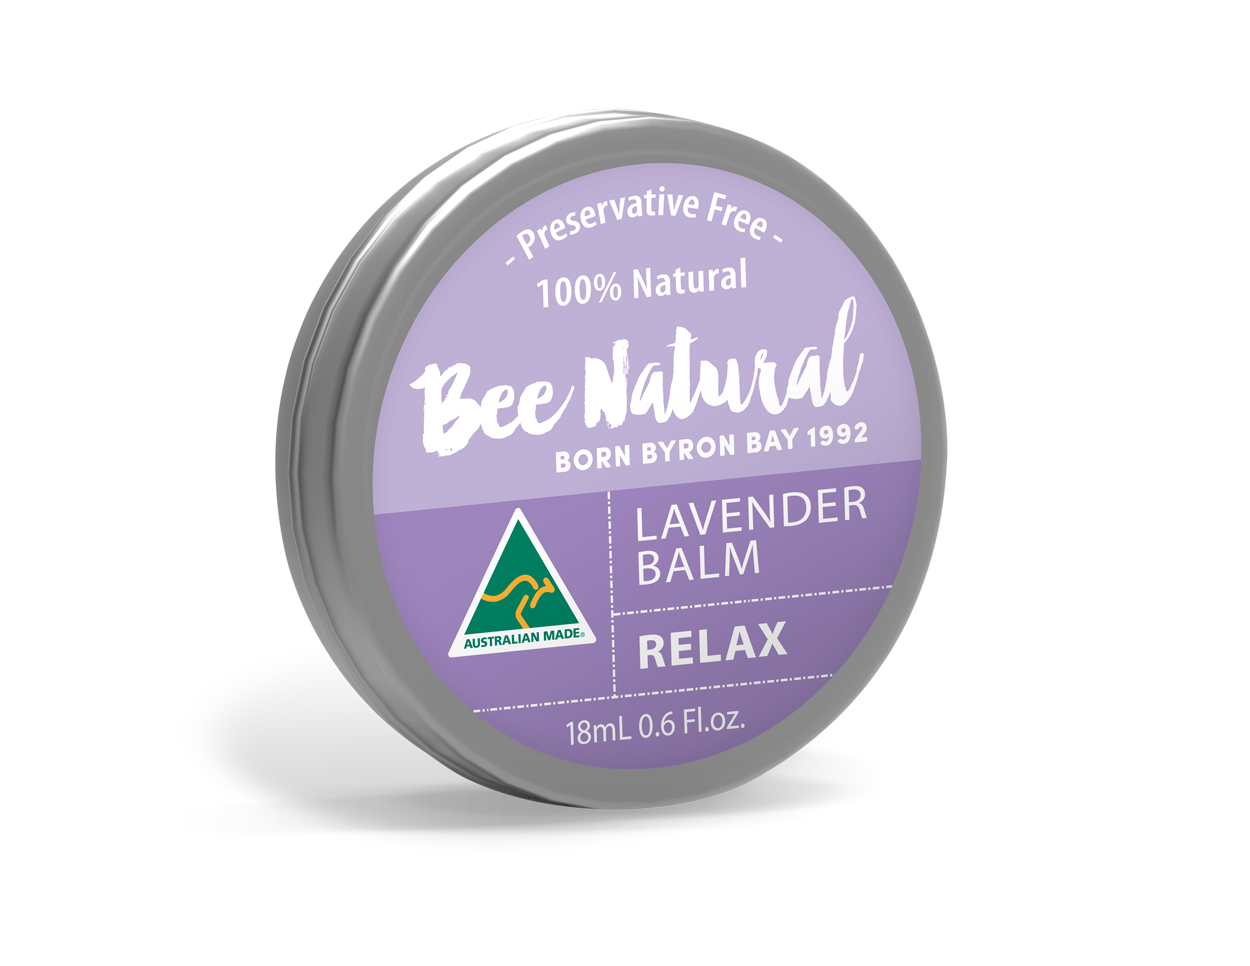 Bee Natural Balm Lavender Relax 18ml